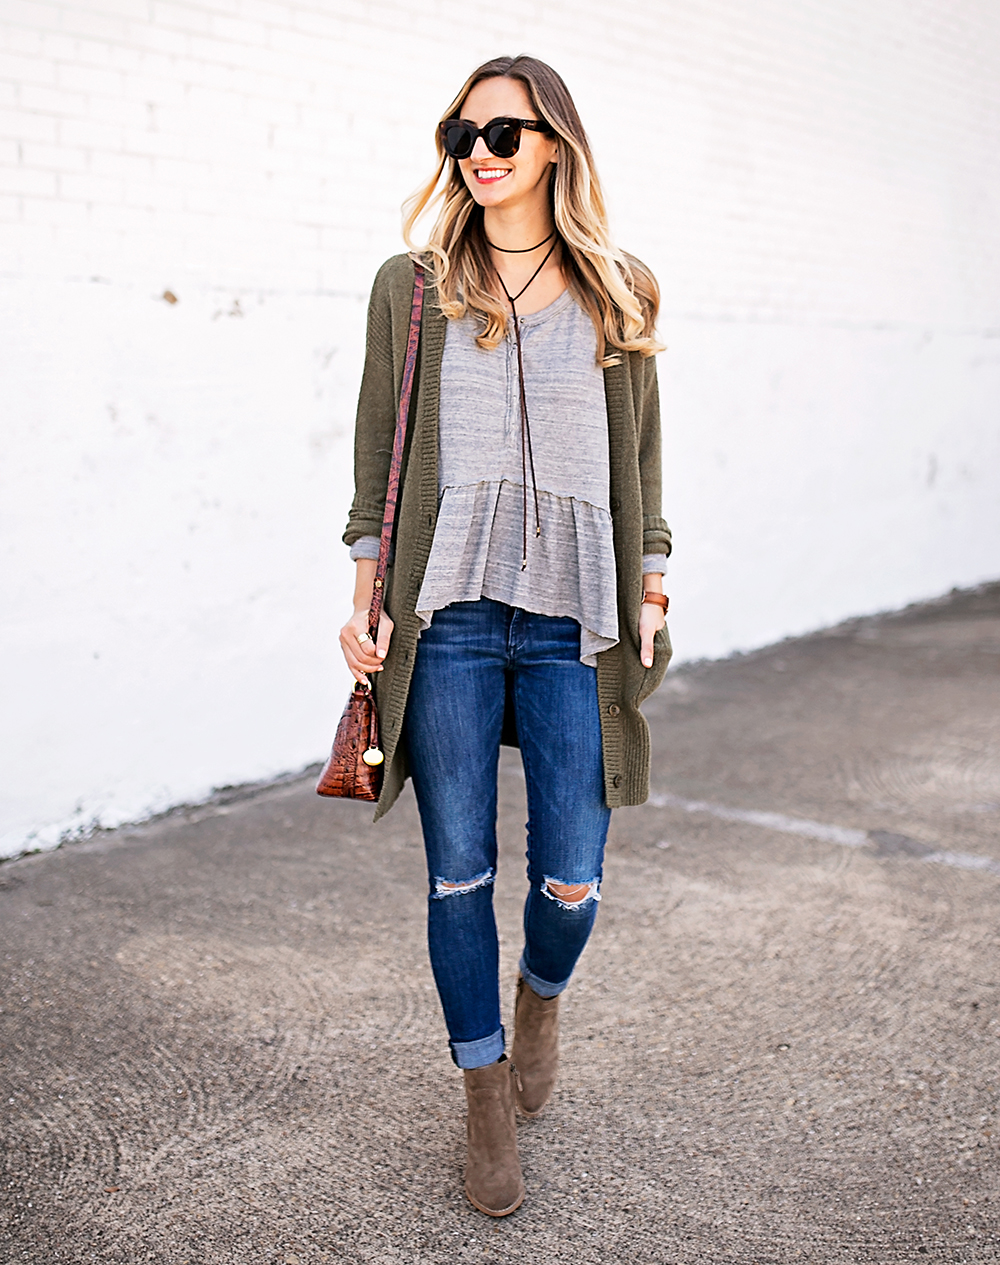 livvyland-blog-olivia-watson-peplum-thermal-tee-shirt-olive-cardigan-boho-outfit-casual-taupe-ankle-booties-fall-outfit-idea-celine-baby-marta-sunglasses-5